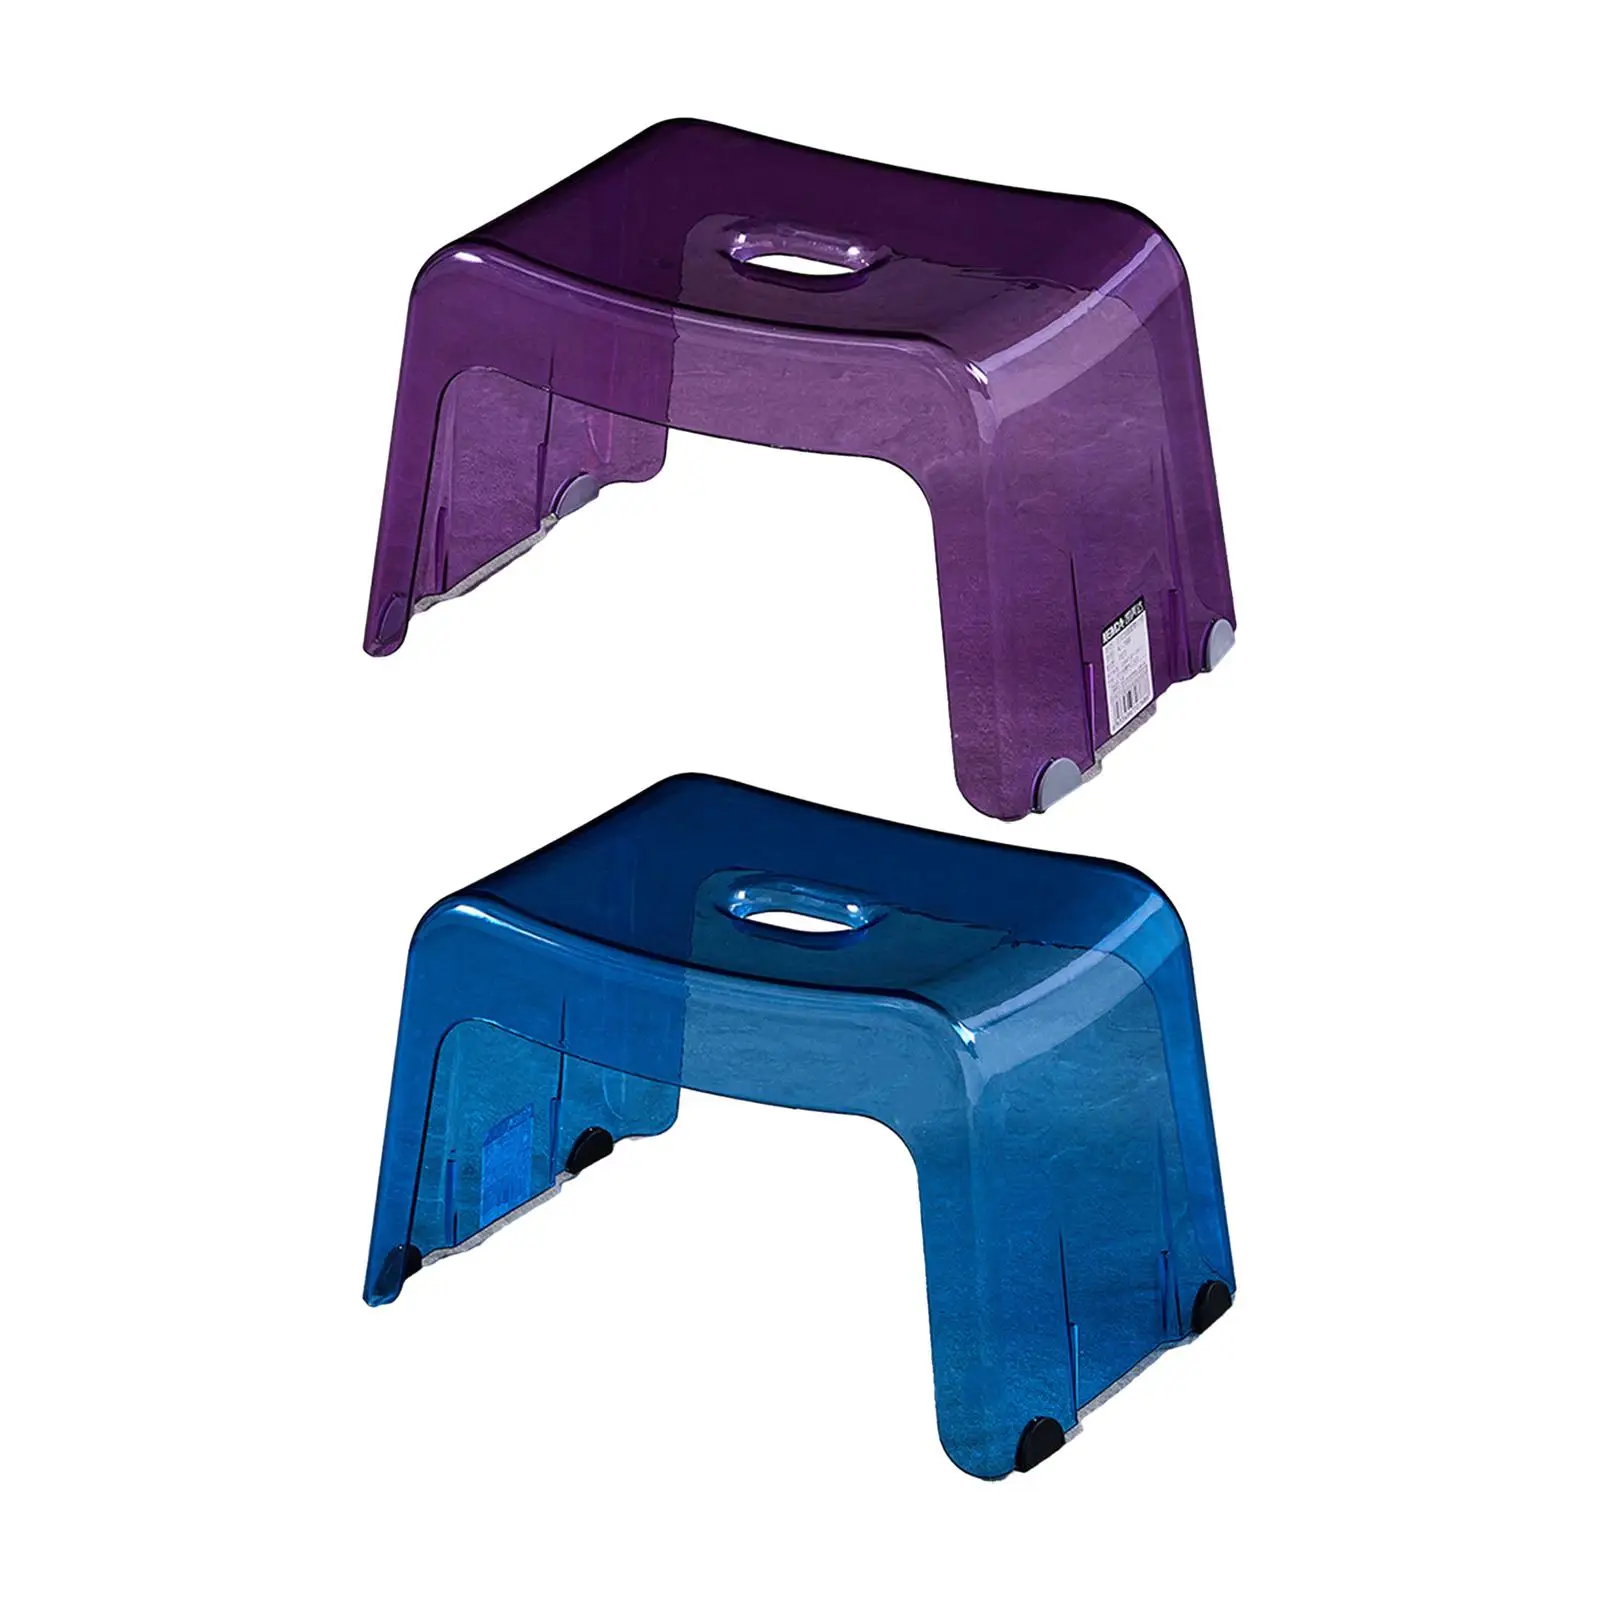 

Small Stool Step Stool Sturdy Stable Portable Comfortable Potty Stool for Bathroom Apartment Adults and Kids Living Room Bedroom